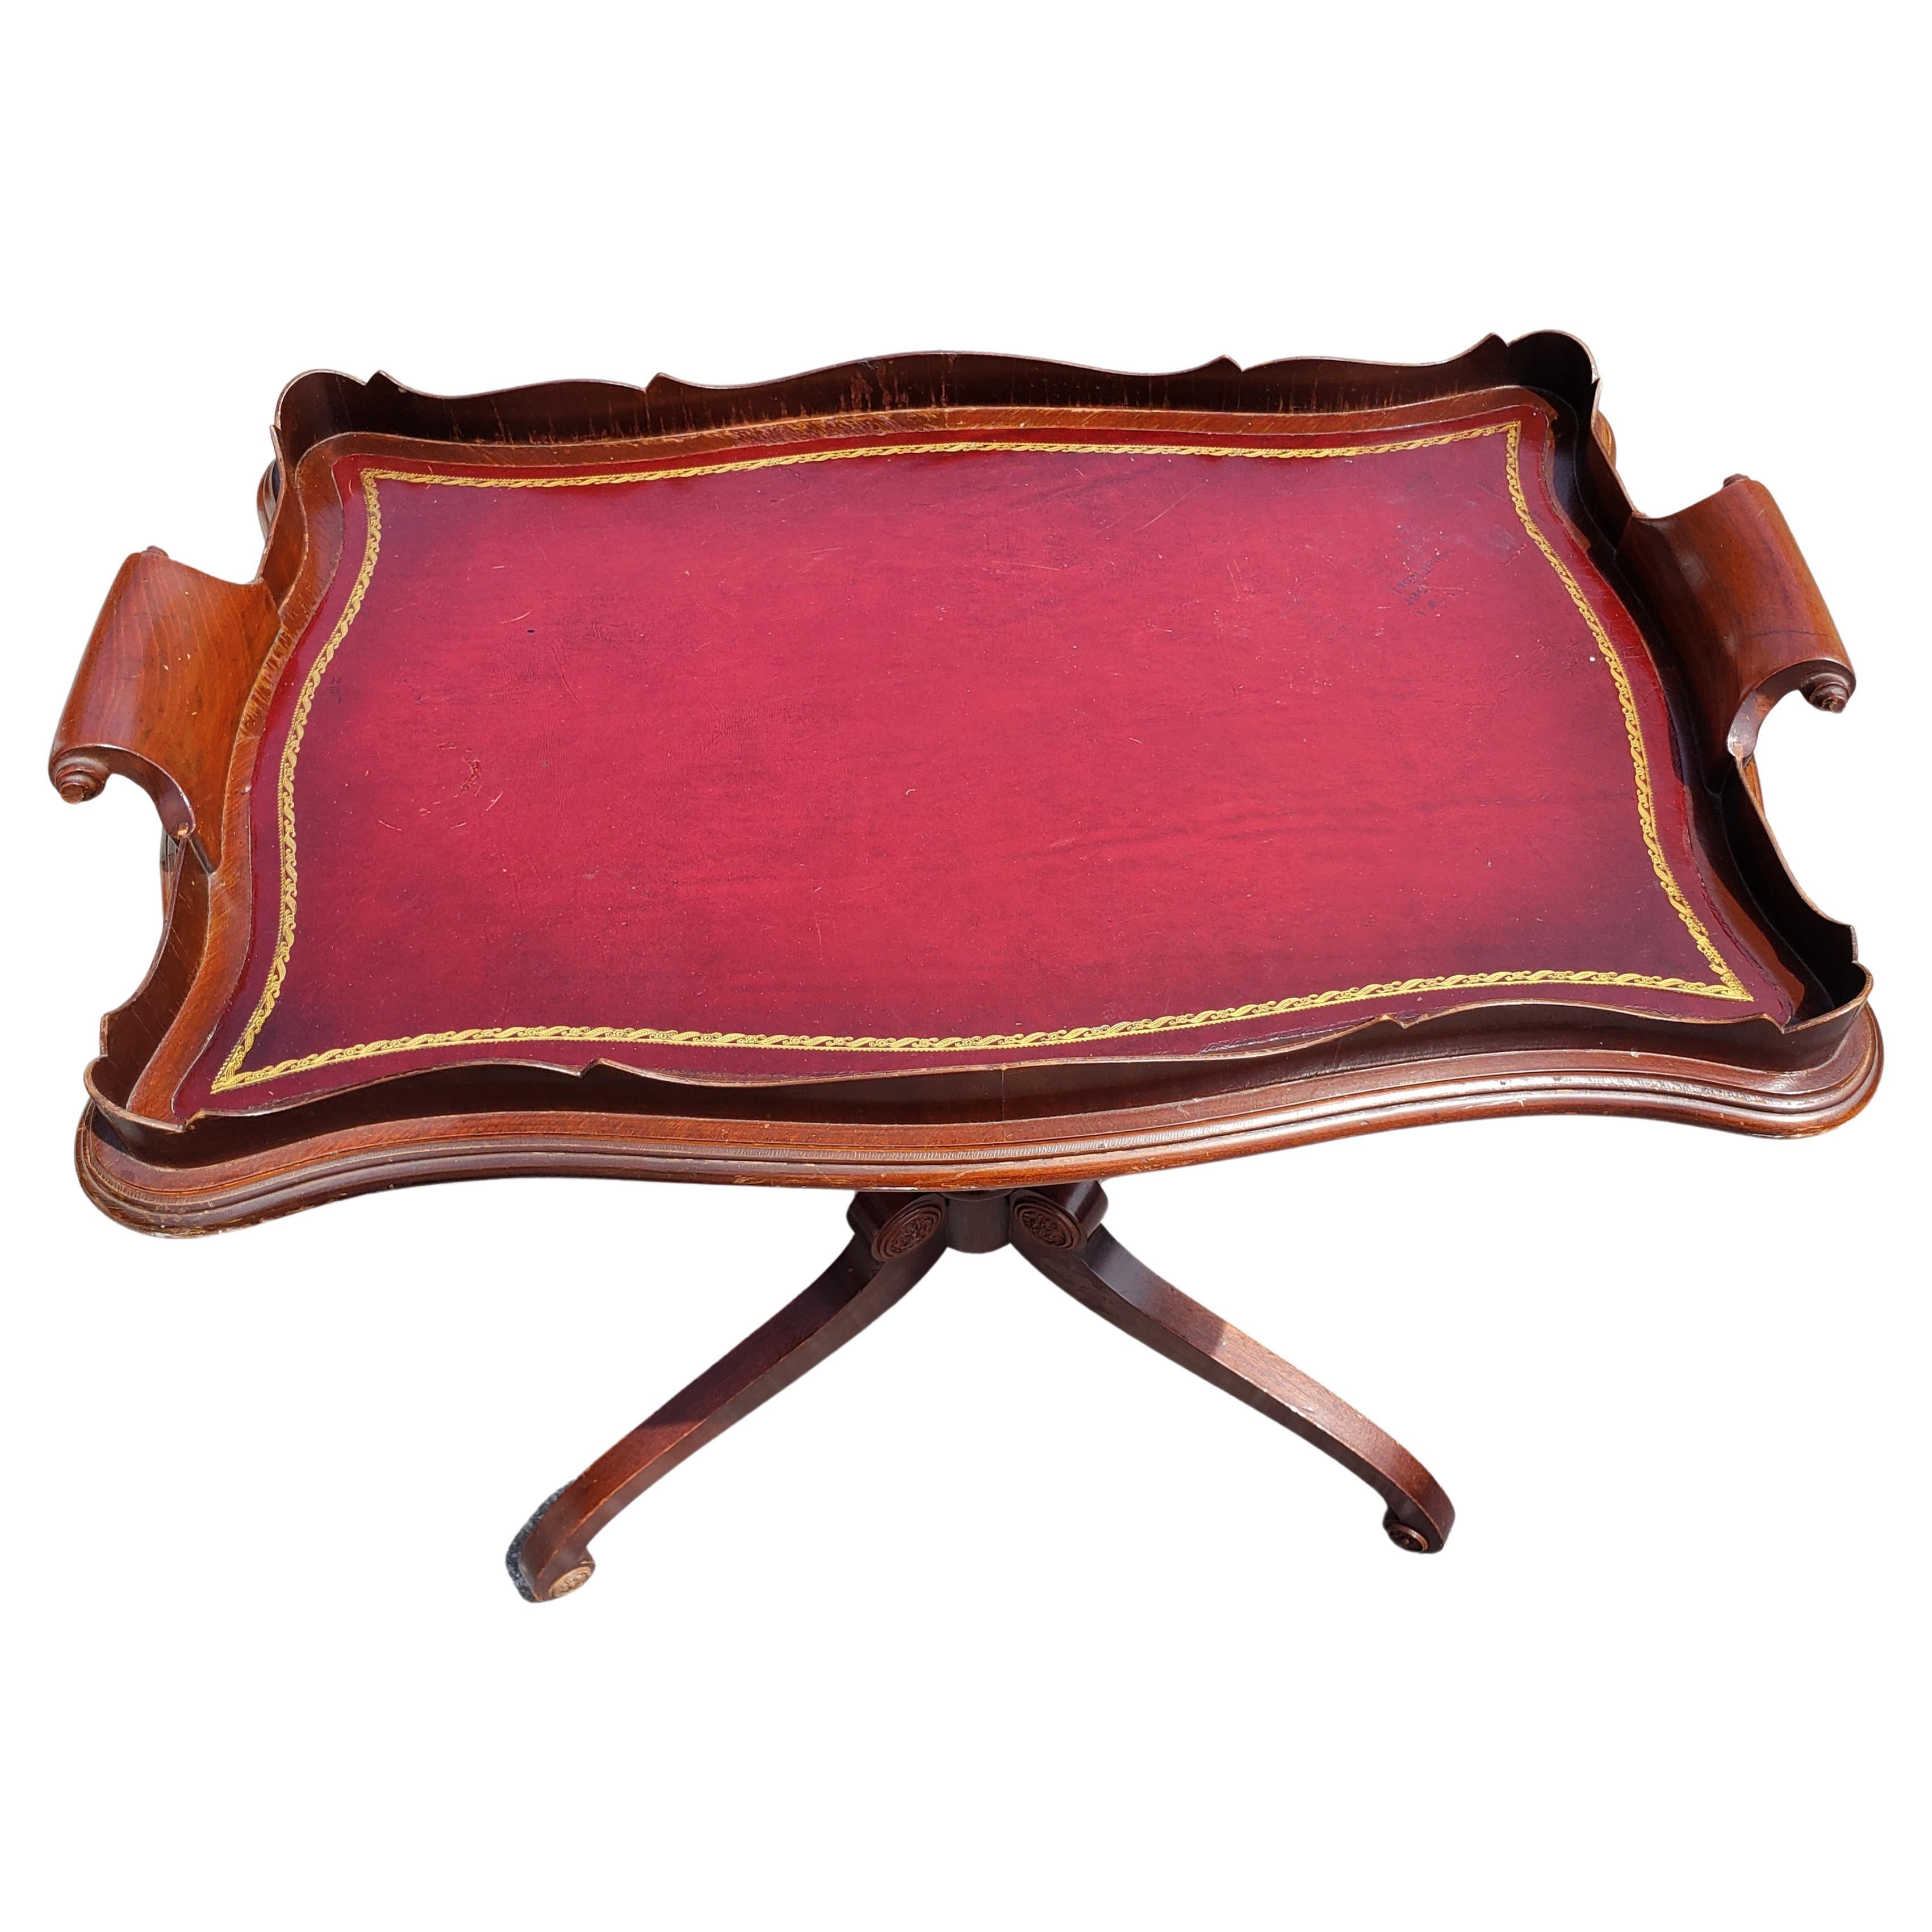 American French Regency Mahogany Quad Feet Pedestal Leather Top Tray Table Tea Table